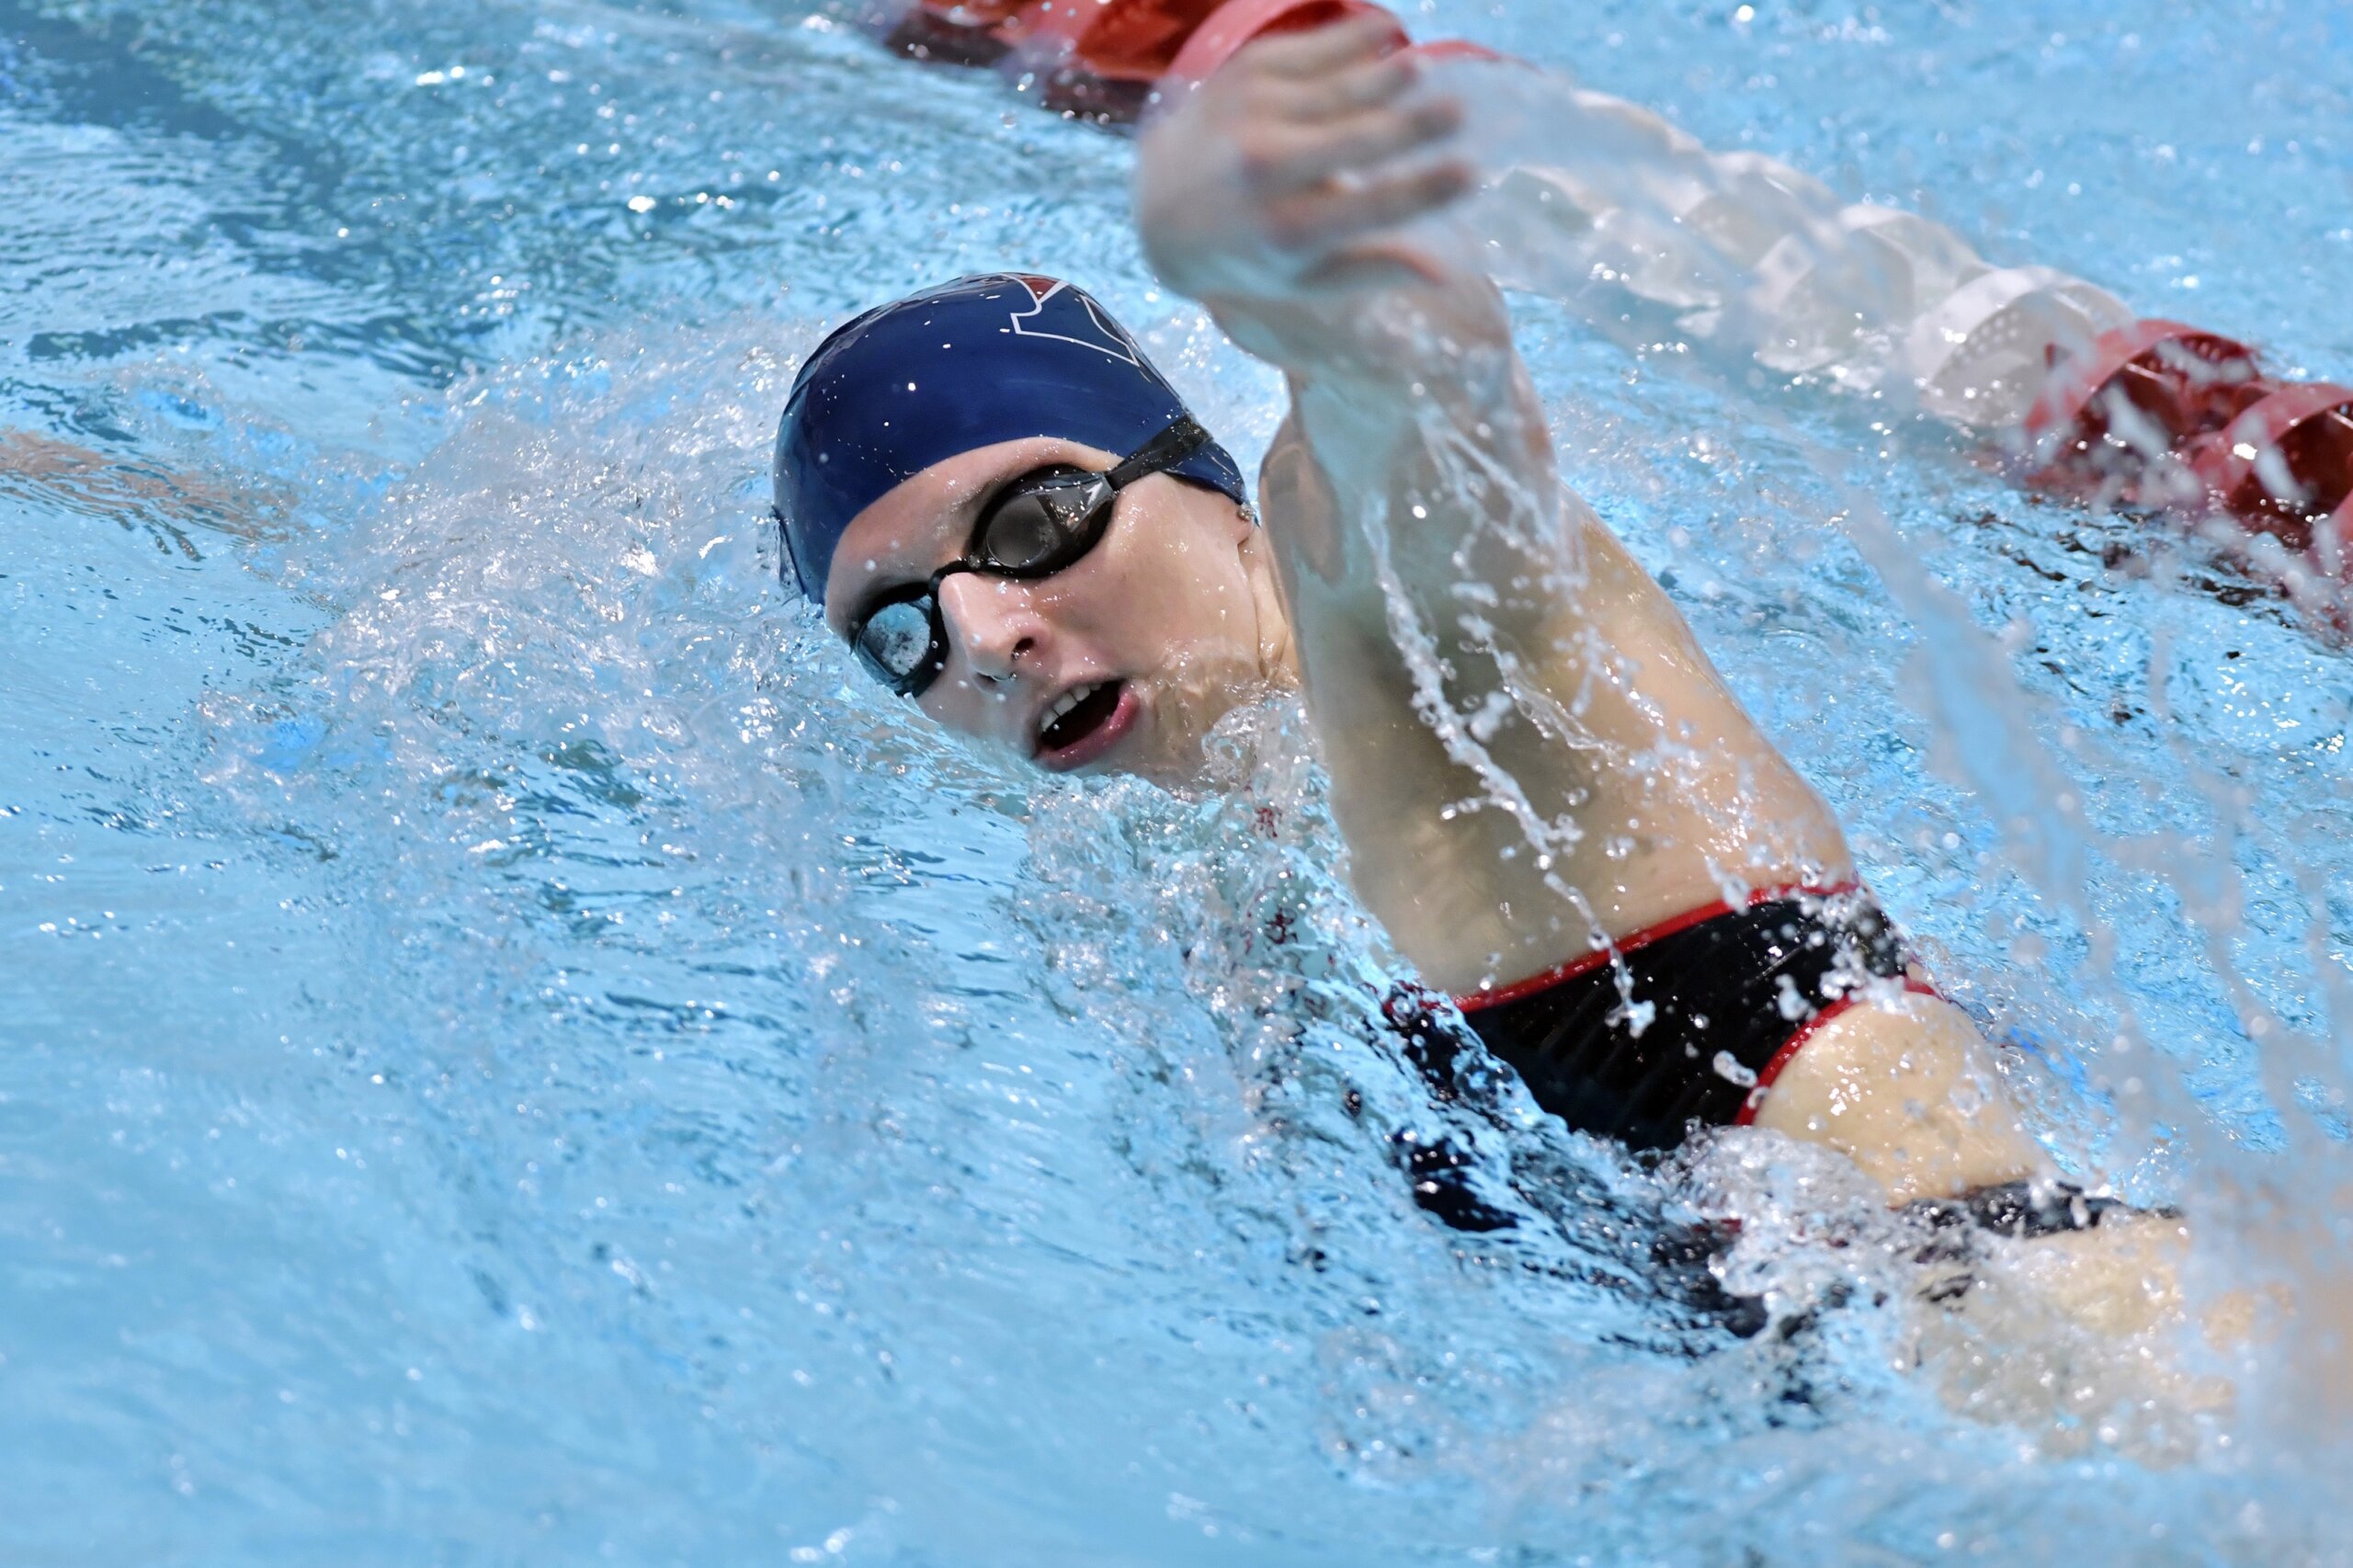 Penn swimmer Lia Thomas swims on amid controversy WTOP News